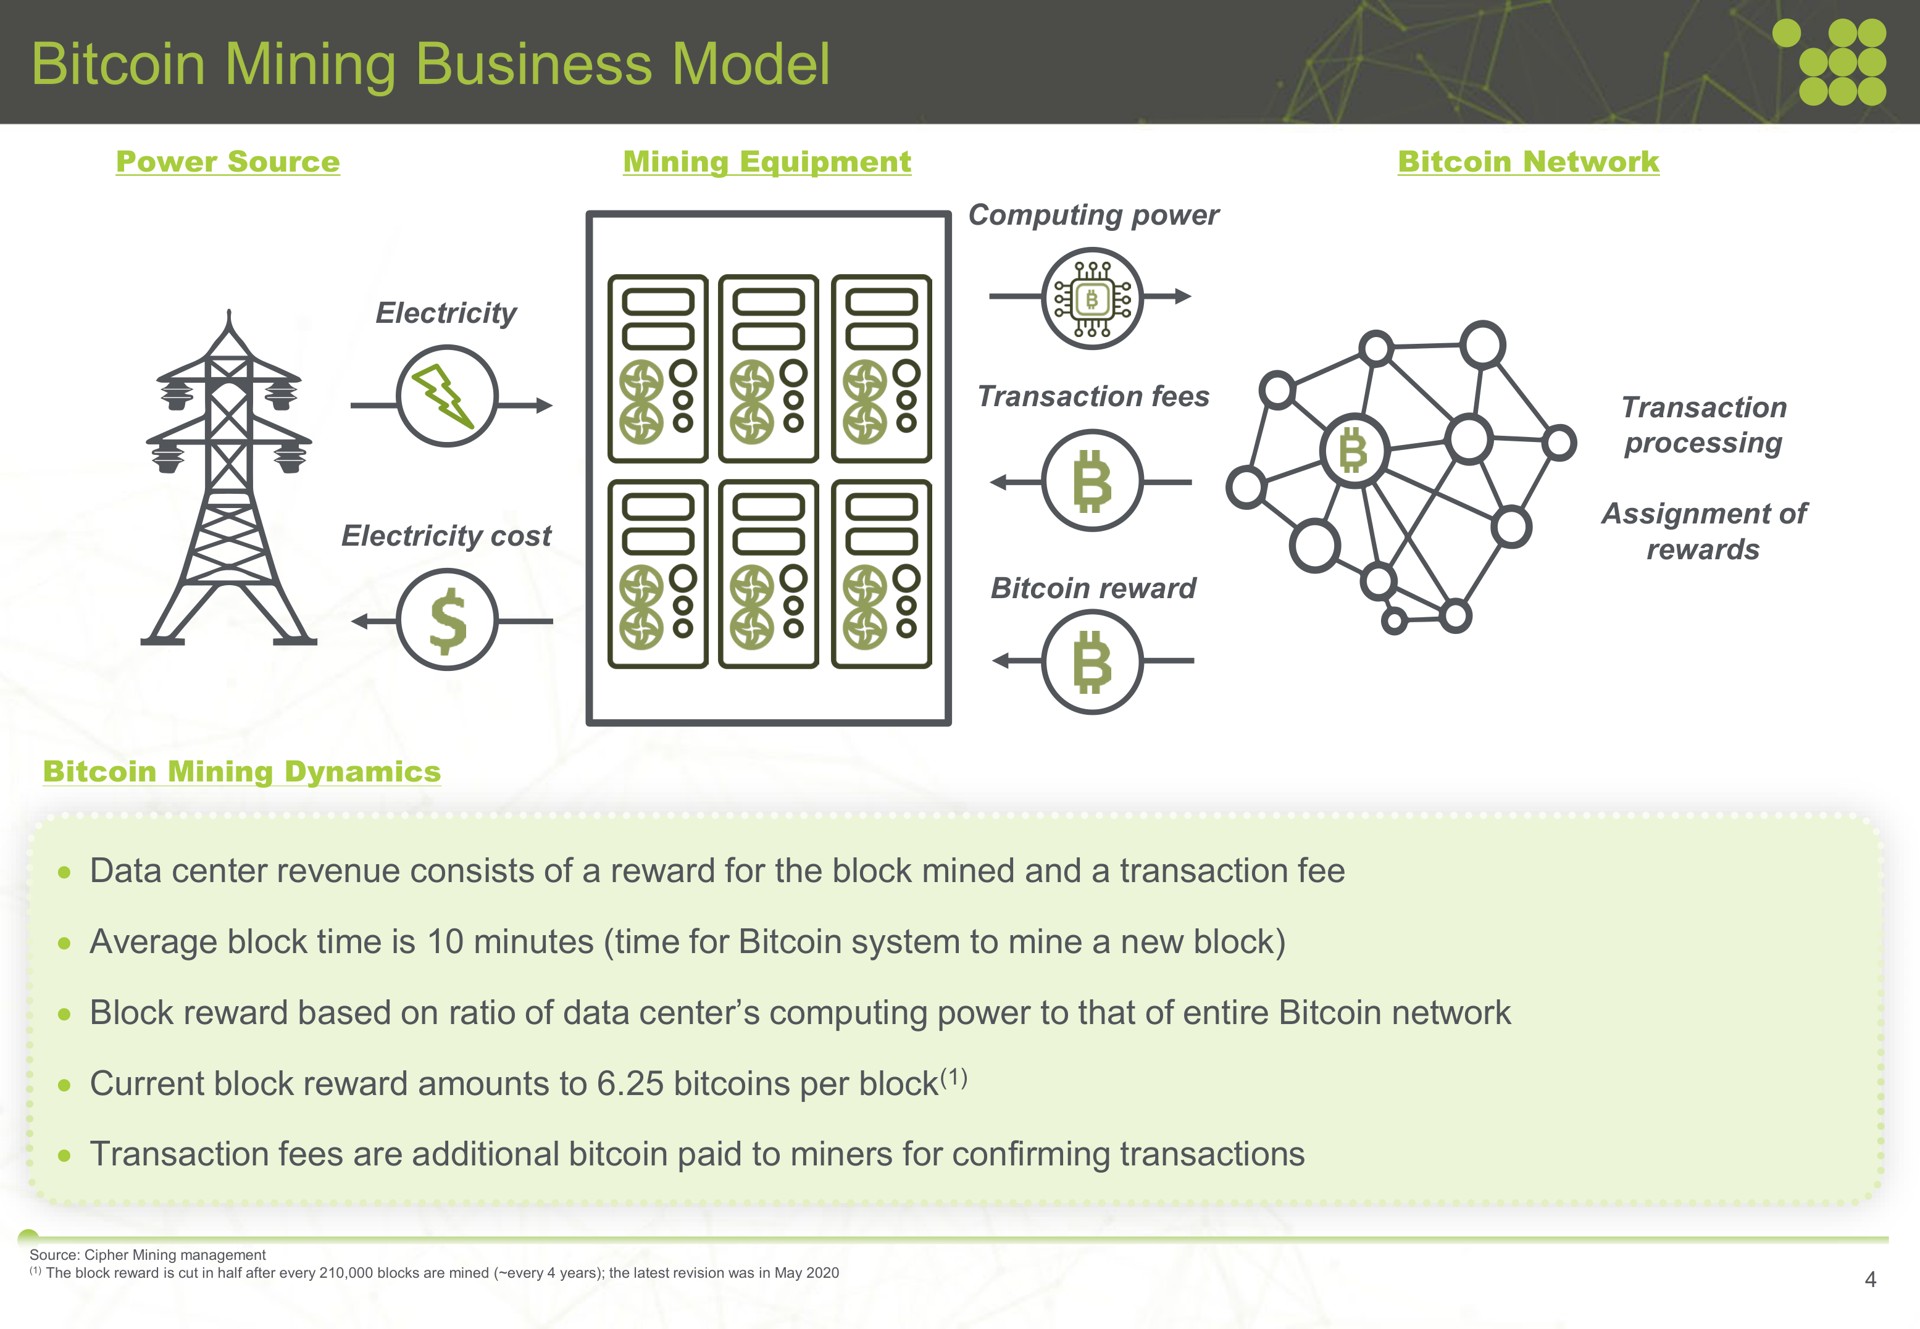 mining business model data center revenue consists of a reward for the block mined and a transaction fee average block time is minutes time for system to mine a new block block reward based on ratio of data center computing power to that of entire network current block reward amounts to per block transaction fees are additional paid to miners for confirming transactions | Cipher Mining